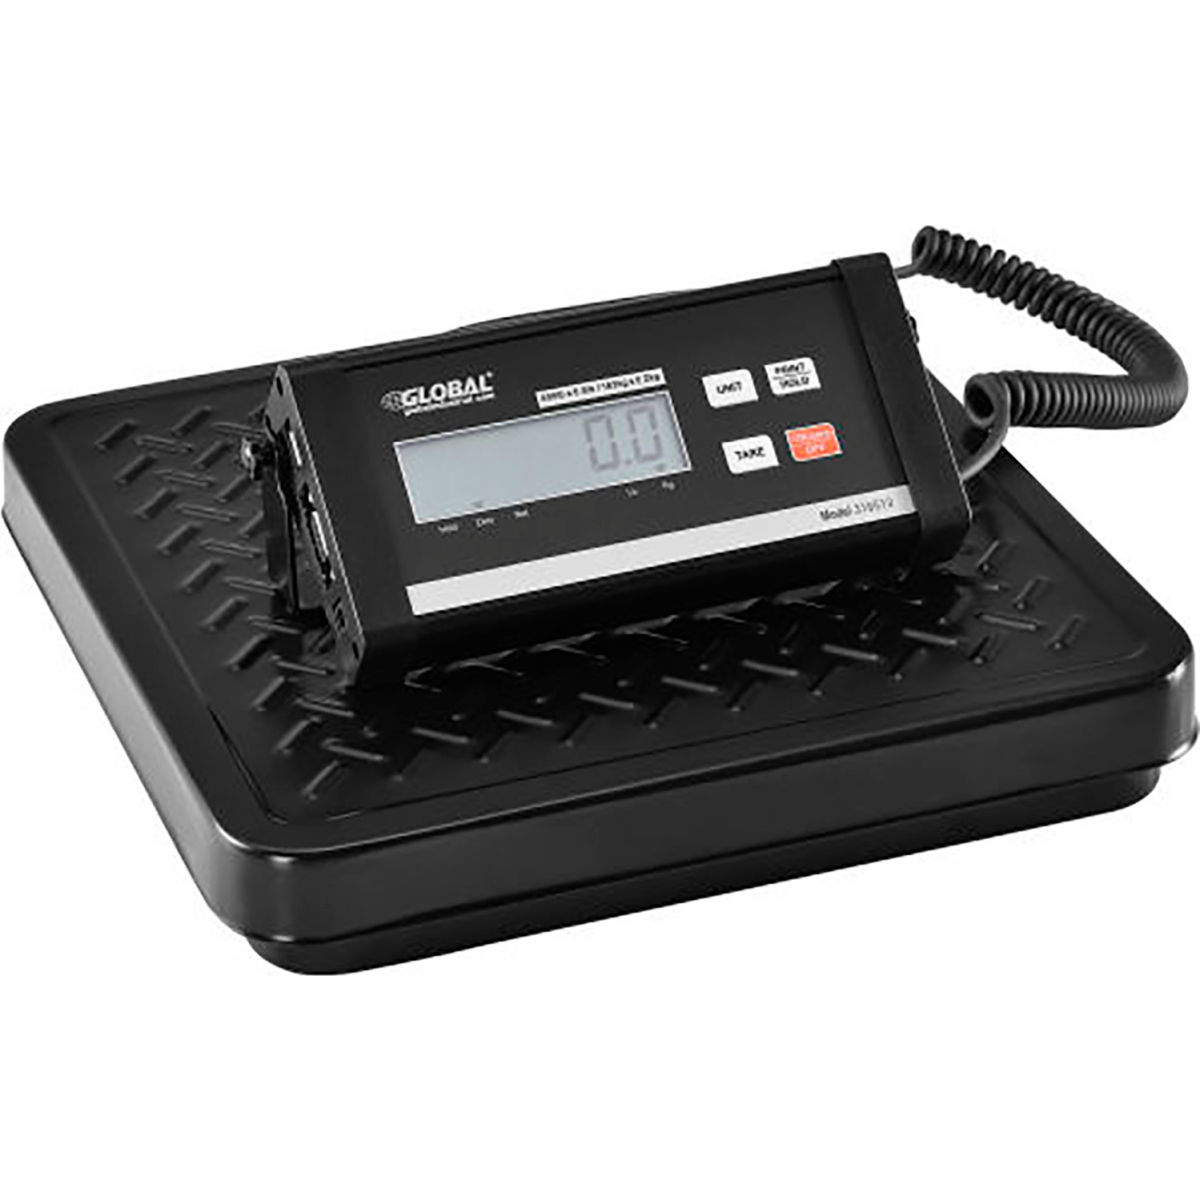 Picture of Nanjing Easthigh International 318513 400 x 0.5 lbs Global Industrial Digital Scale with AC Adapter & USB Port